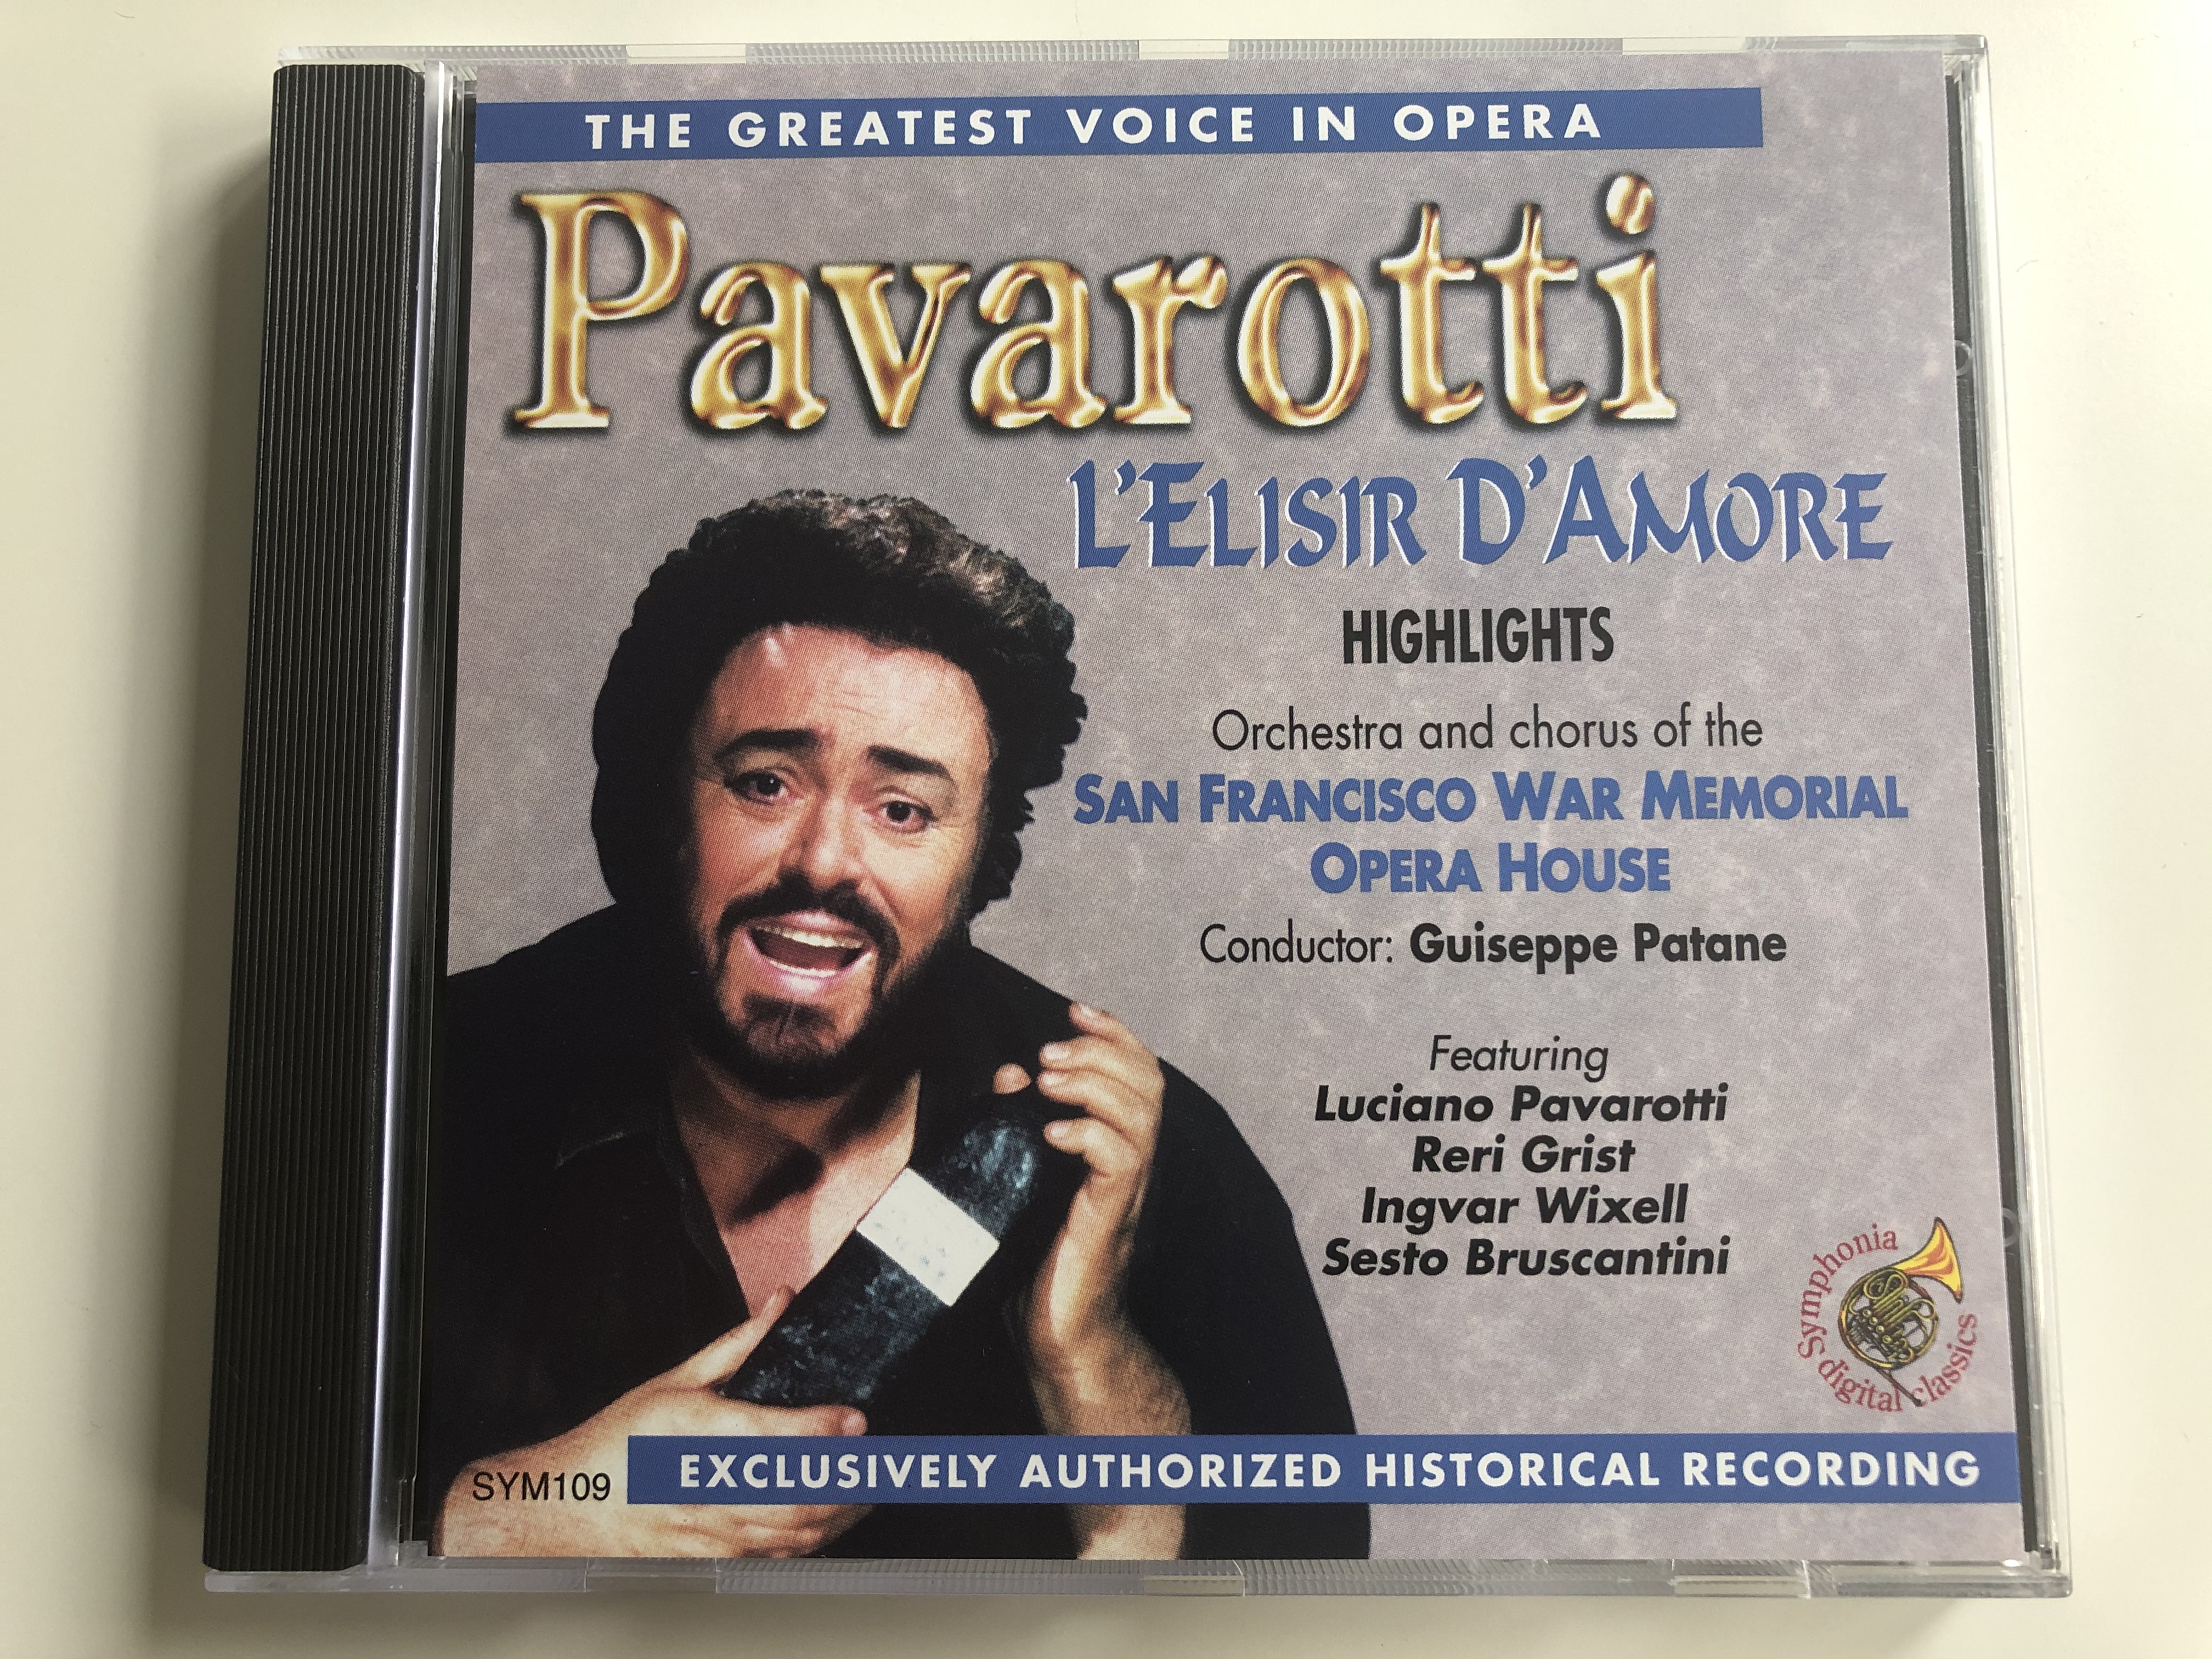 the-greatest-voice-in-opera-pavarotti-l-elisir-d-amore-highlights-orchestra-and-chorus-of-the-san-francisco-war-memorial-opera-house-conductor-guiseppe-patane-featuring-luciano-pavarotti-rer-1-.jpg